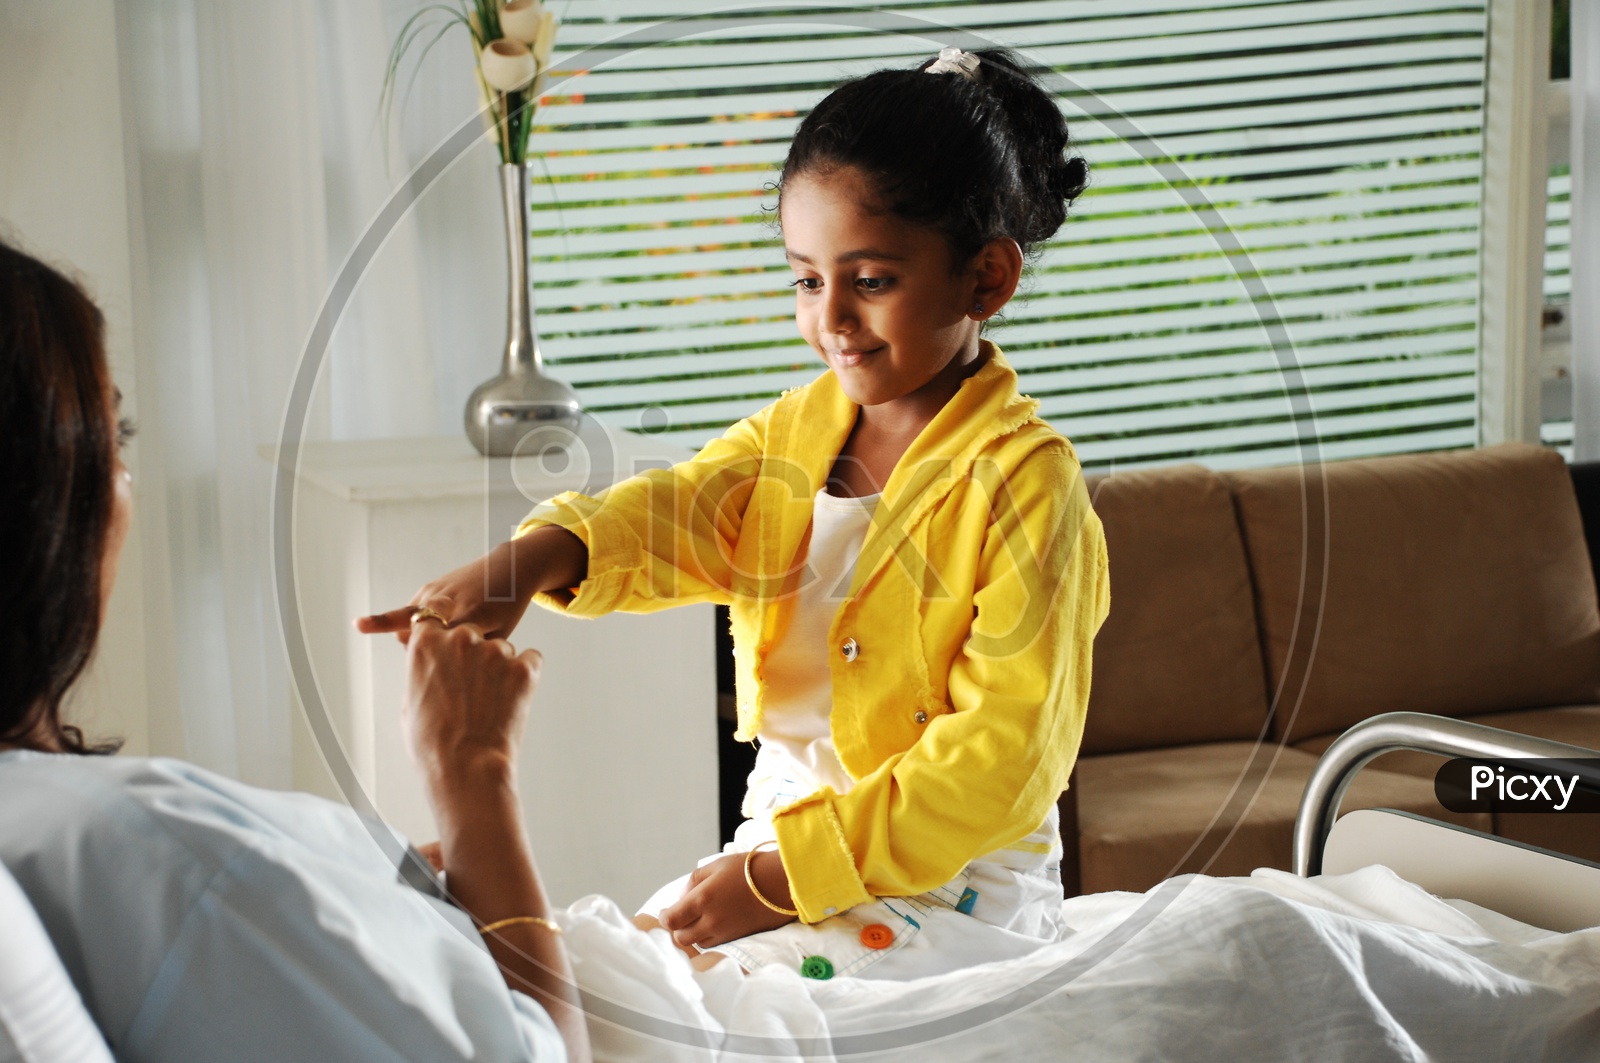 Girl Child Playing With a Woman on Hospital Bed